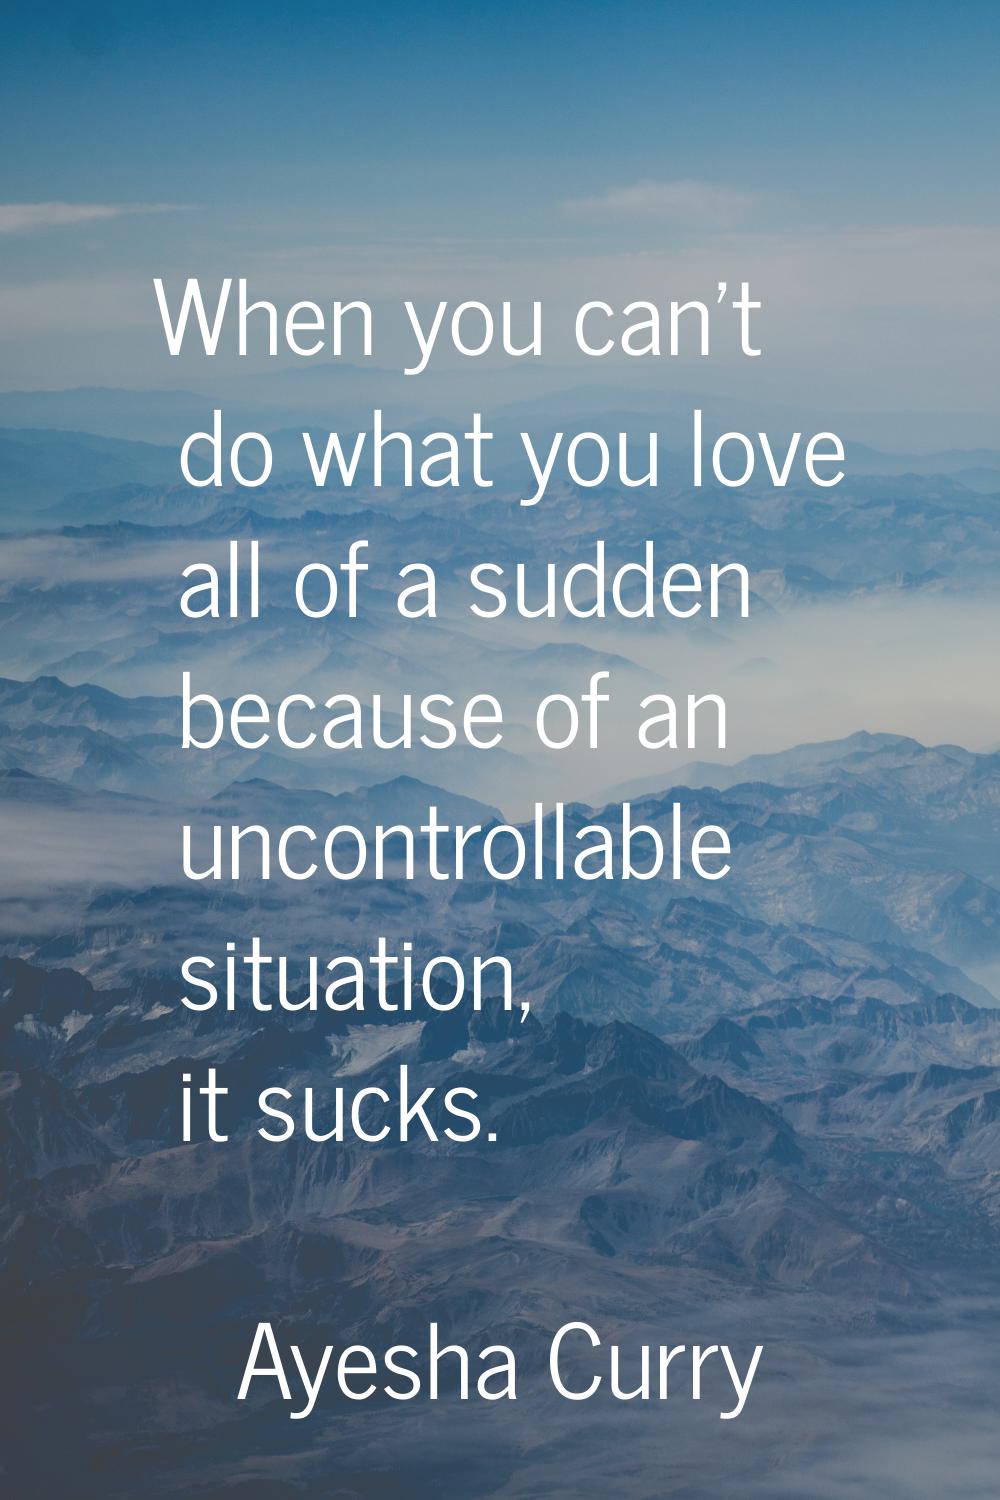 When you can't do what you love all of a sudden because of an uncontrollable situation, it sucks.